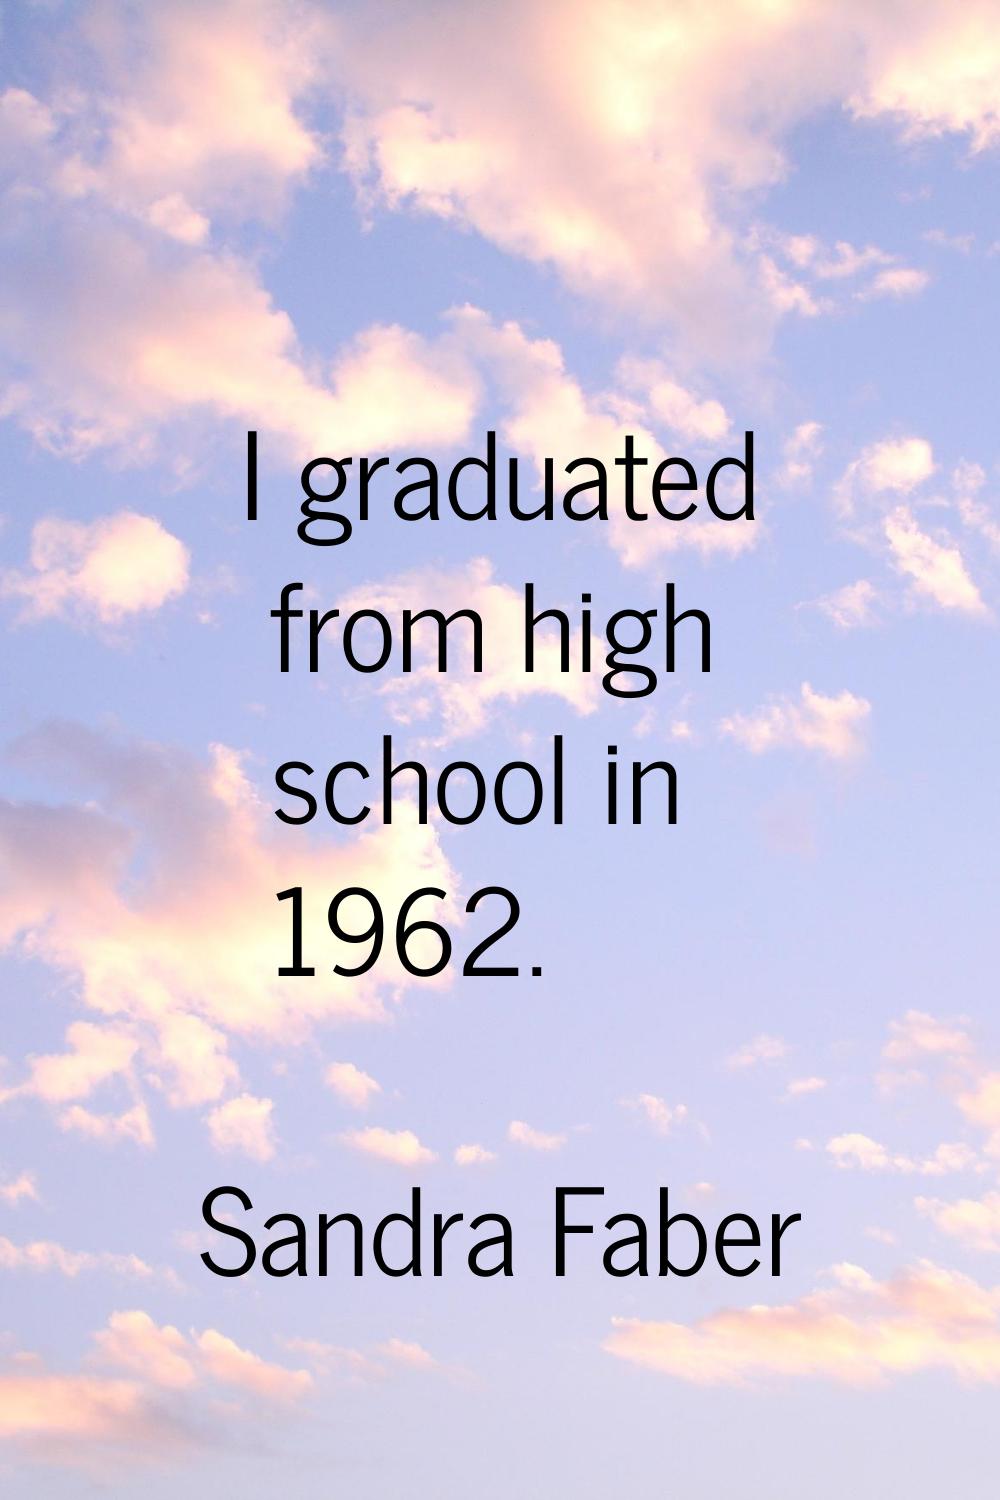 I graduated from high school in 1962.